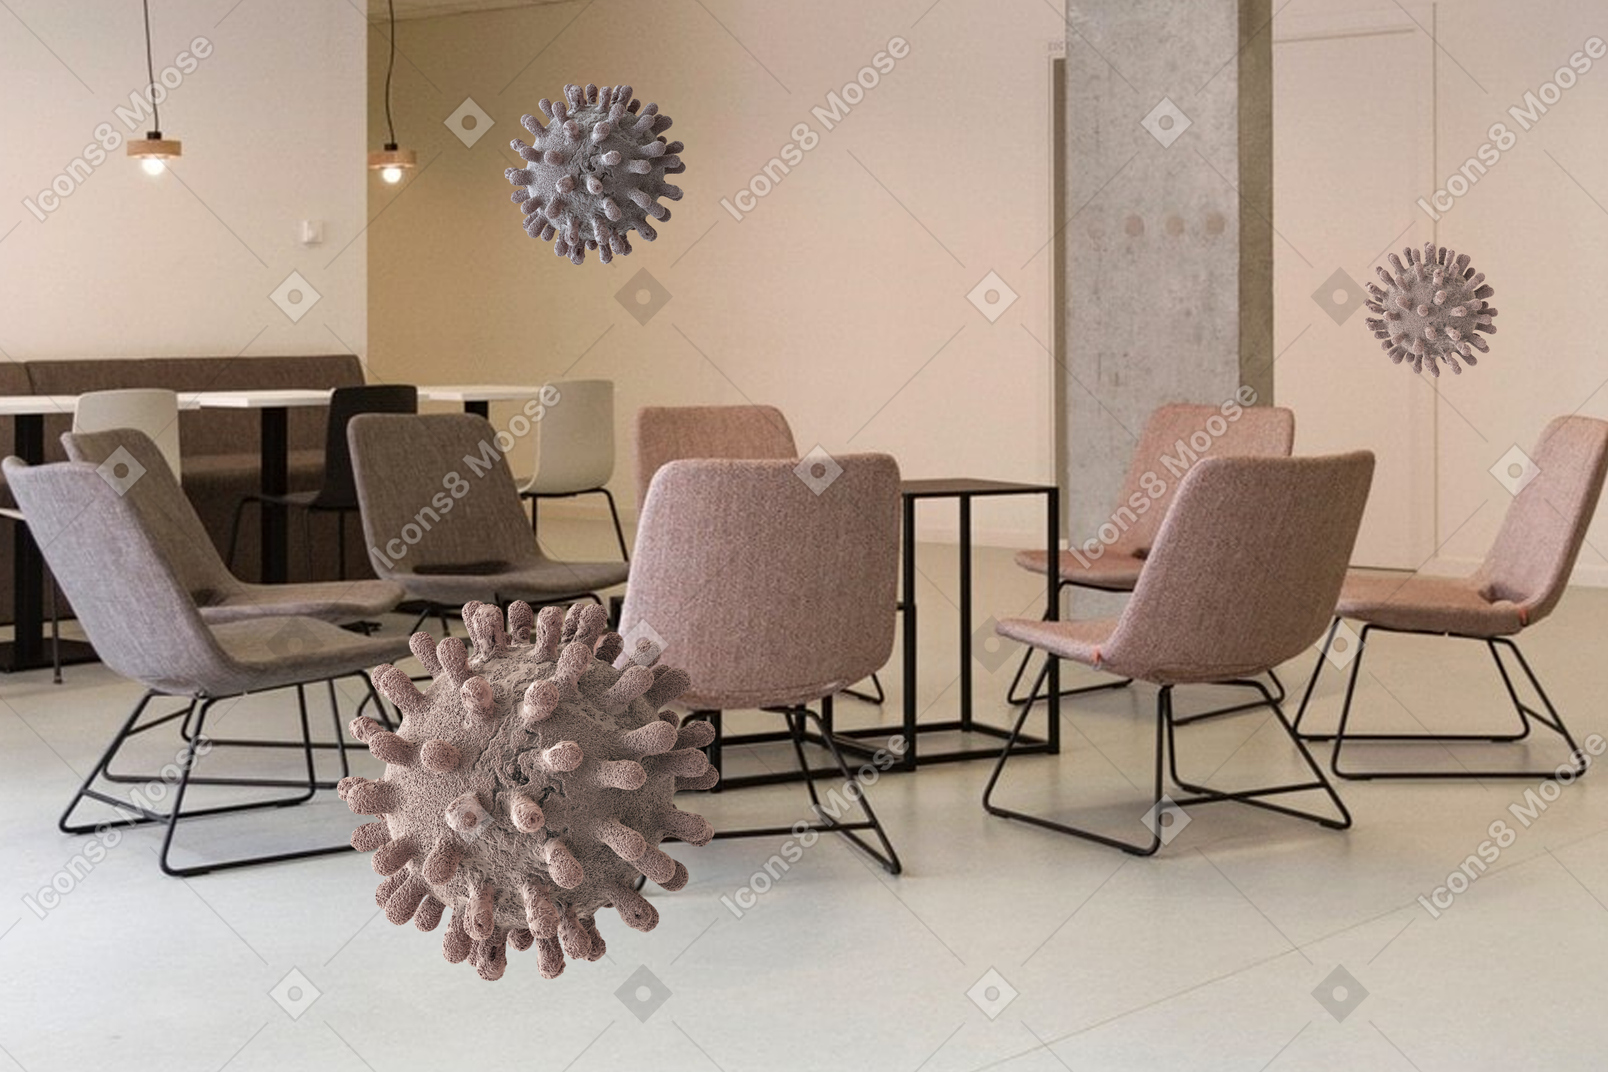 A conference room with coronavirus in the air